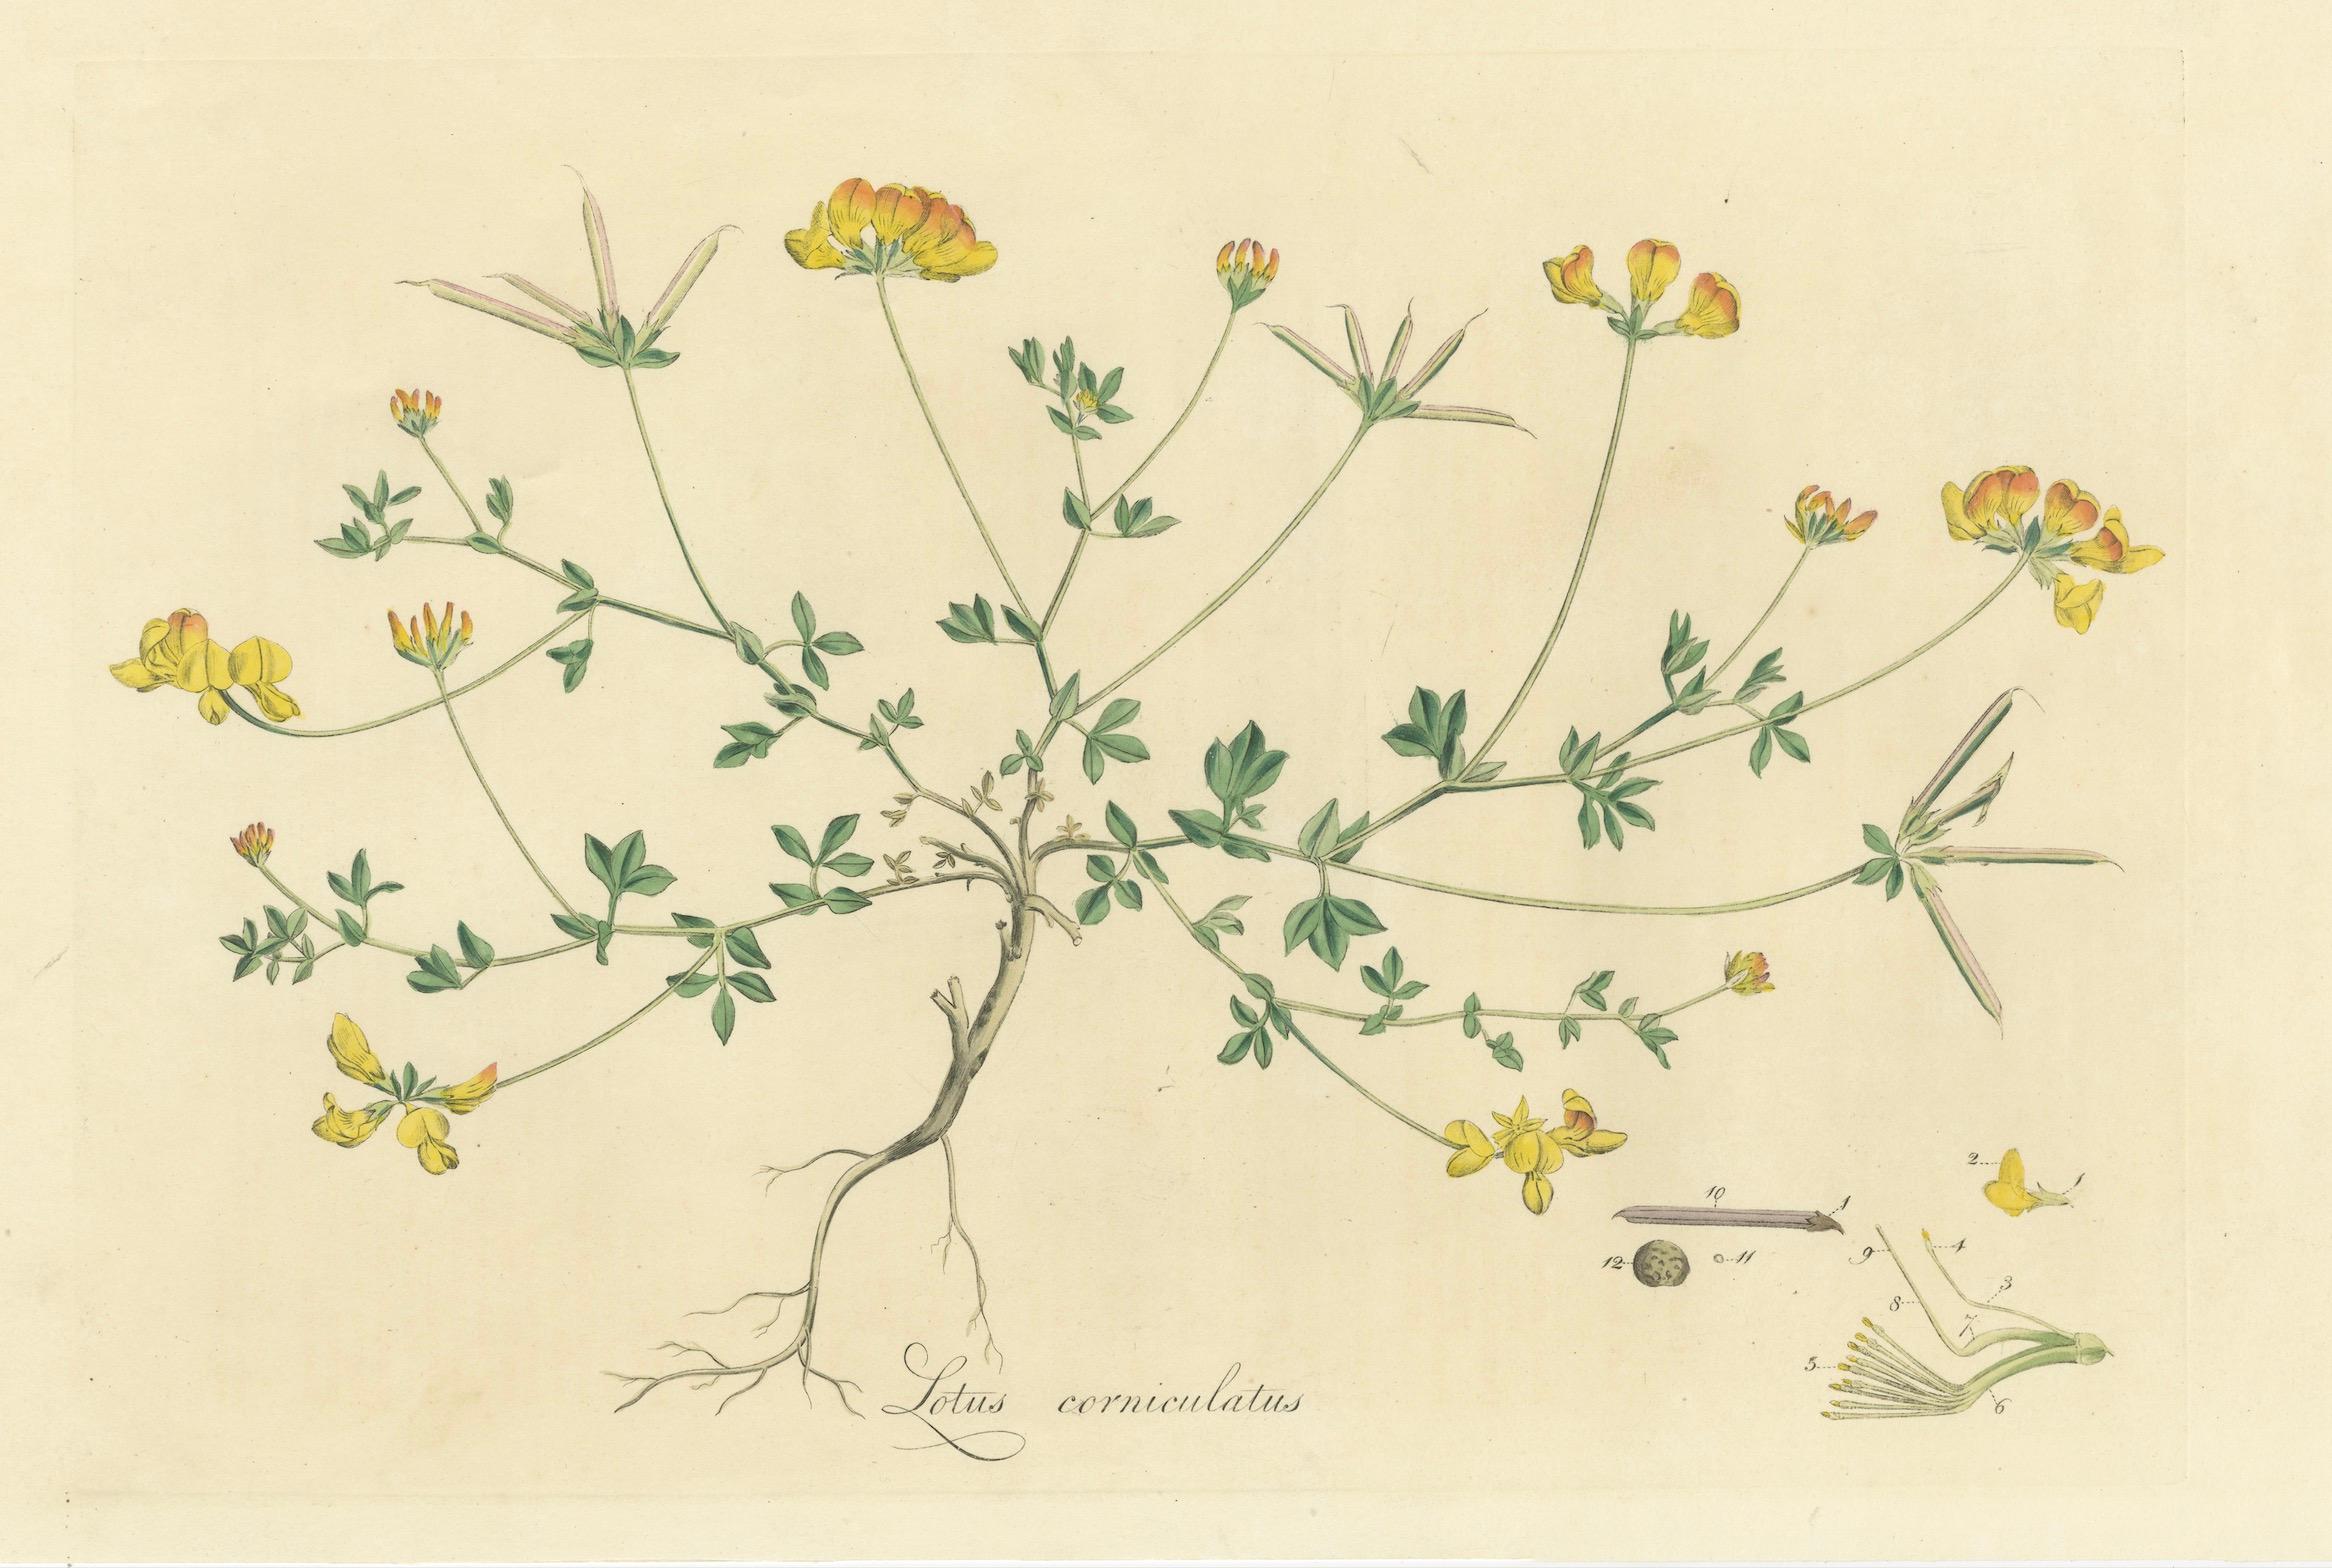 Late 18th Century Hand-Colored Antique Print of the Lotus Corniculatus or Birds-foot Trefoil, 1777